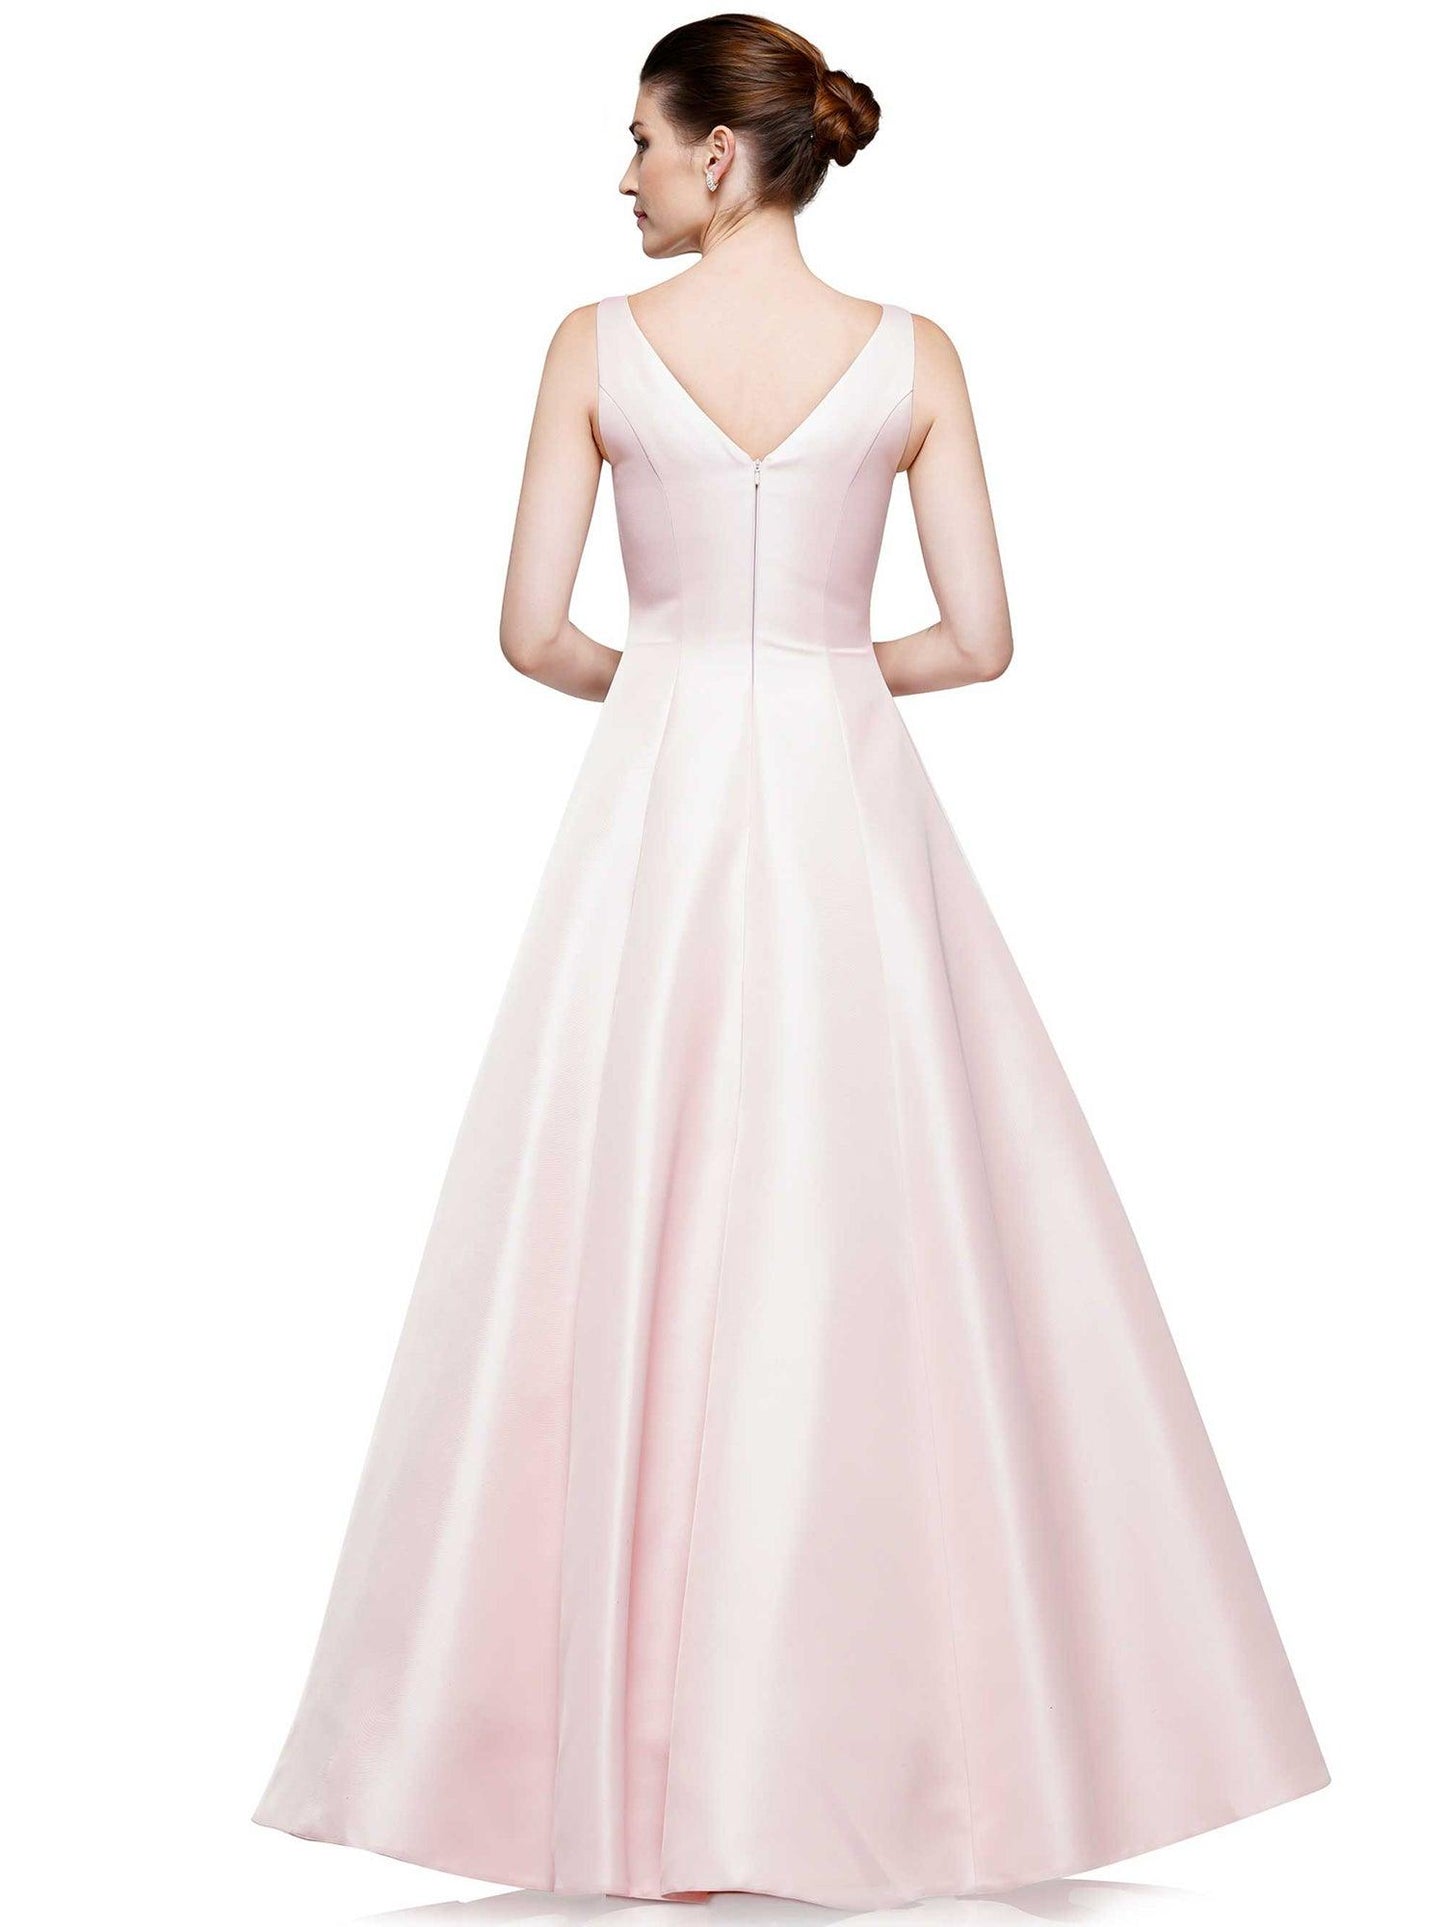 Marsoni Formal Long Mother of the Bride Dress 1009 - The Dress Outlet